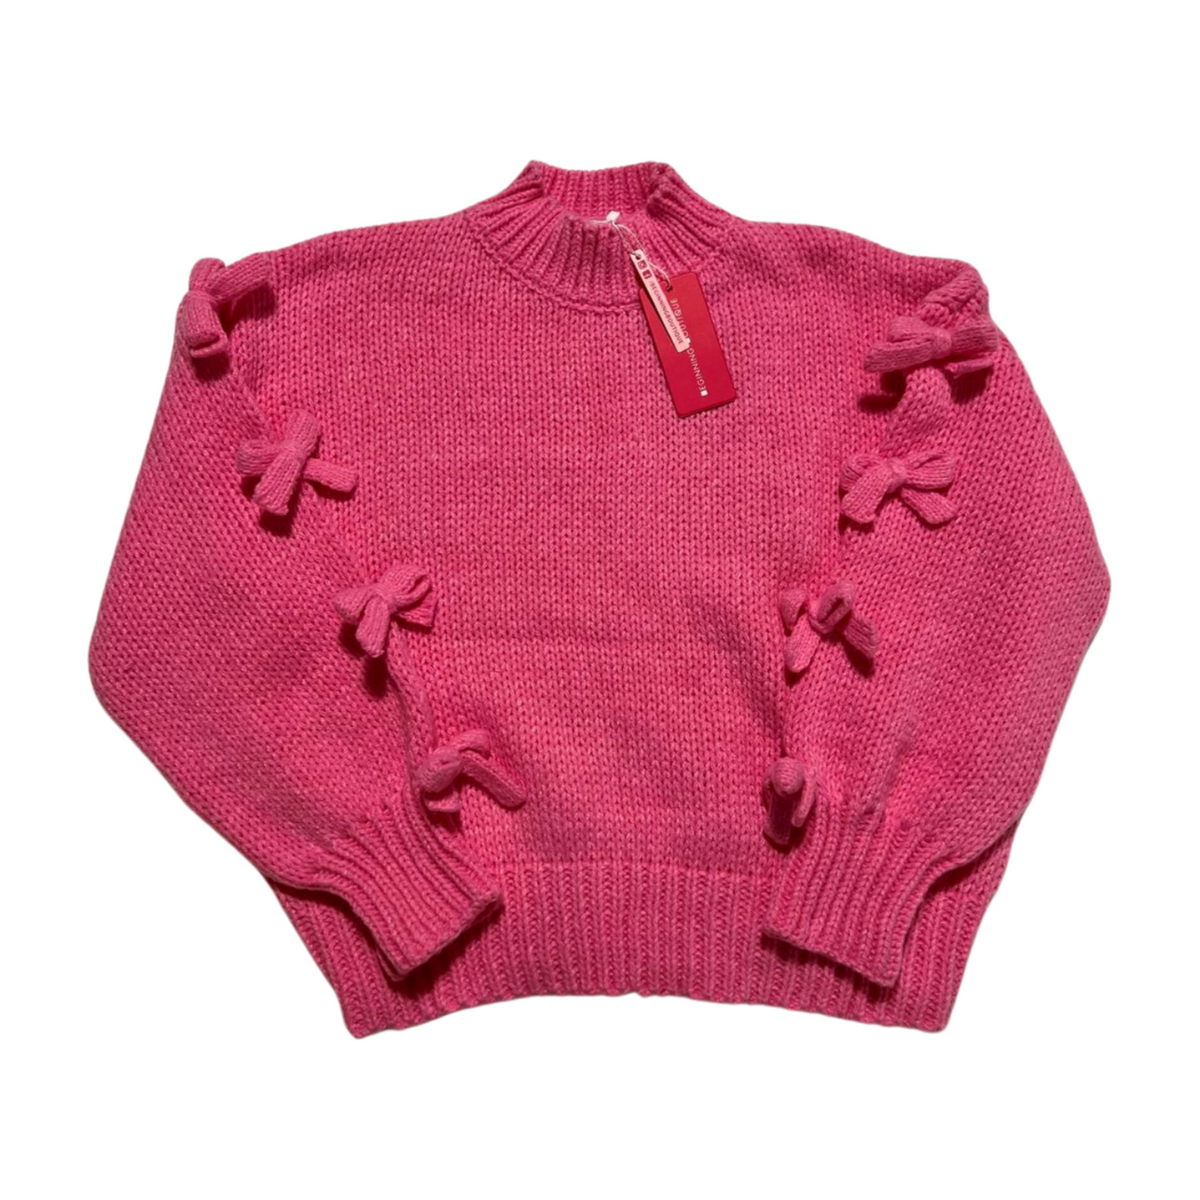 Beginning Boutique- Pink "Short and Sweet" Sweater NEW WITH TAGS!